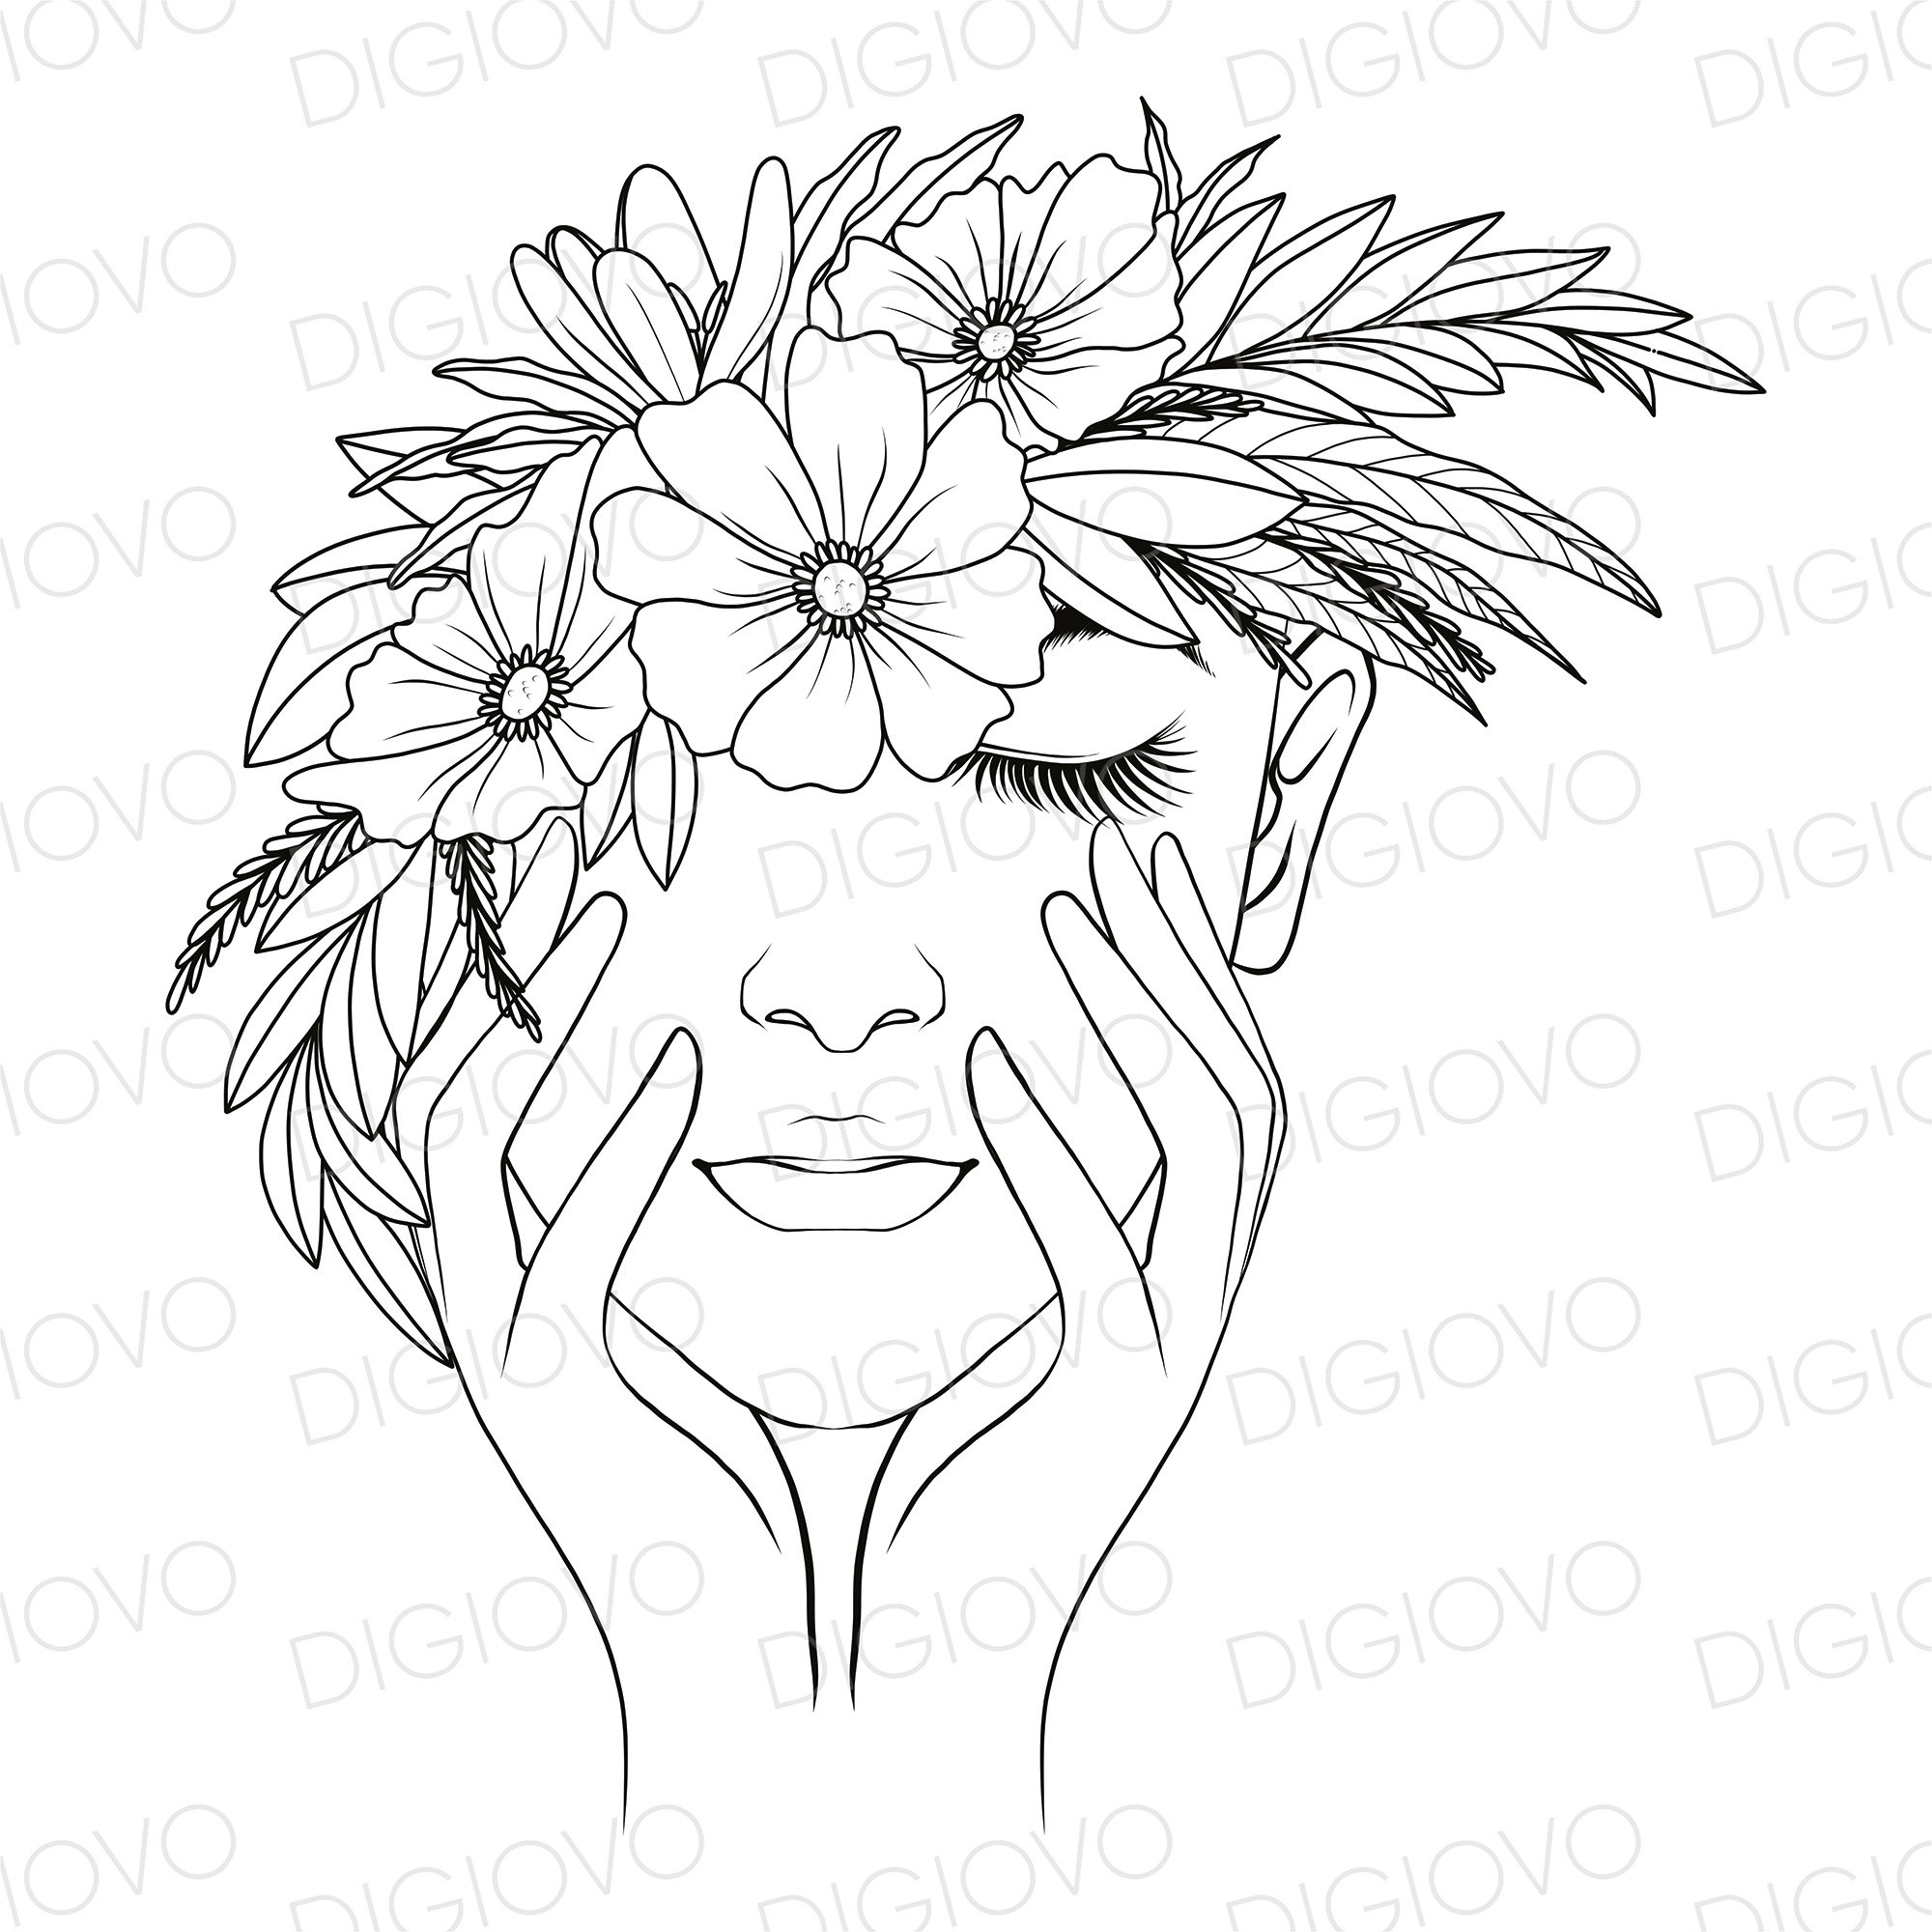 Line Art Face Front of Cake Silhouette - Floral Lady